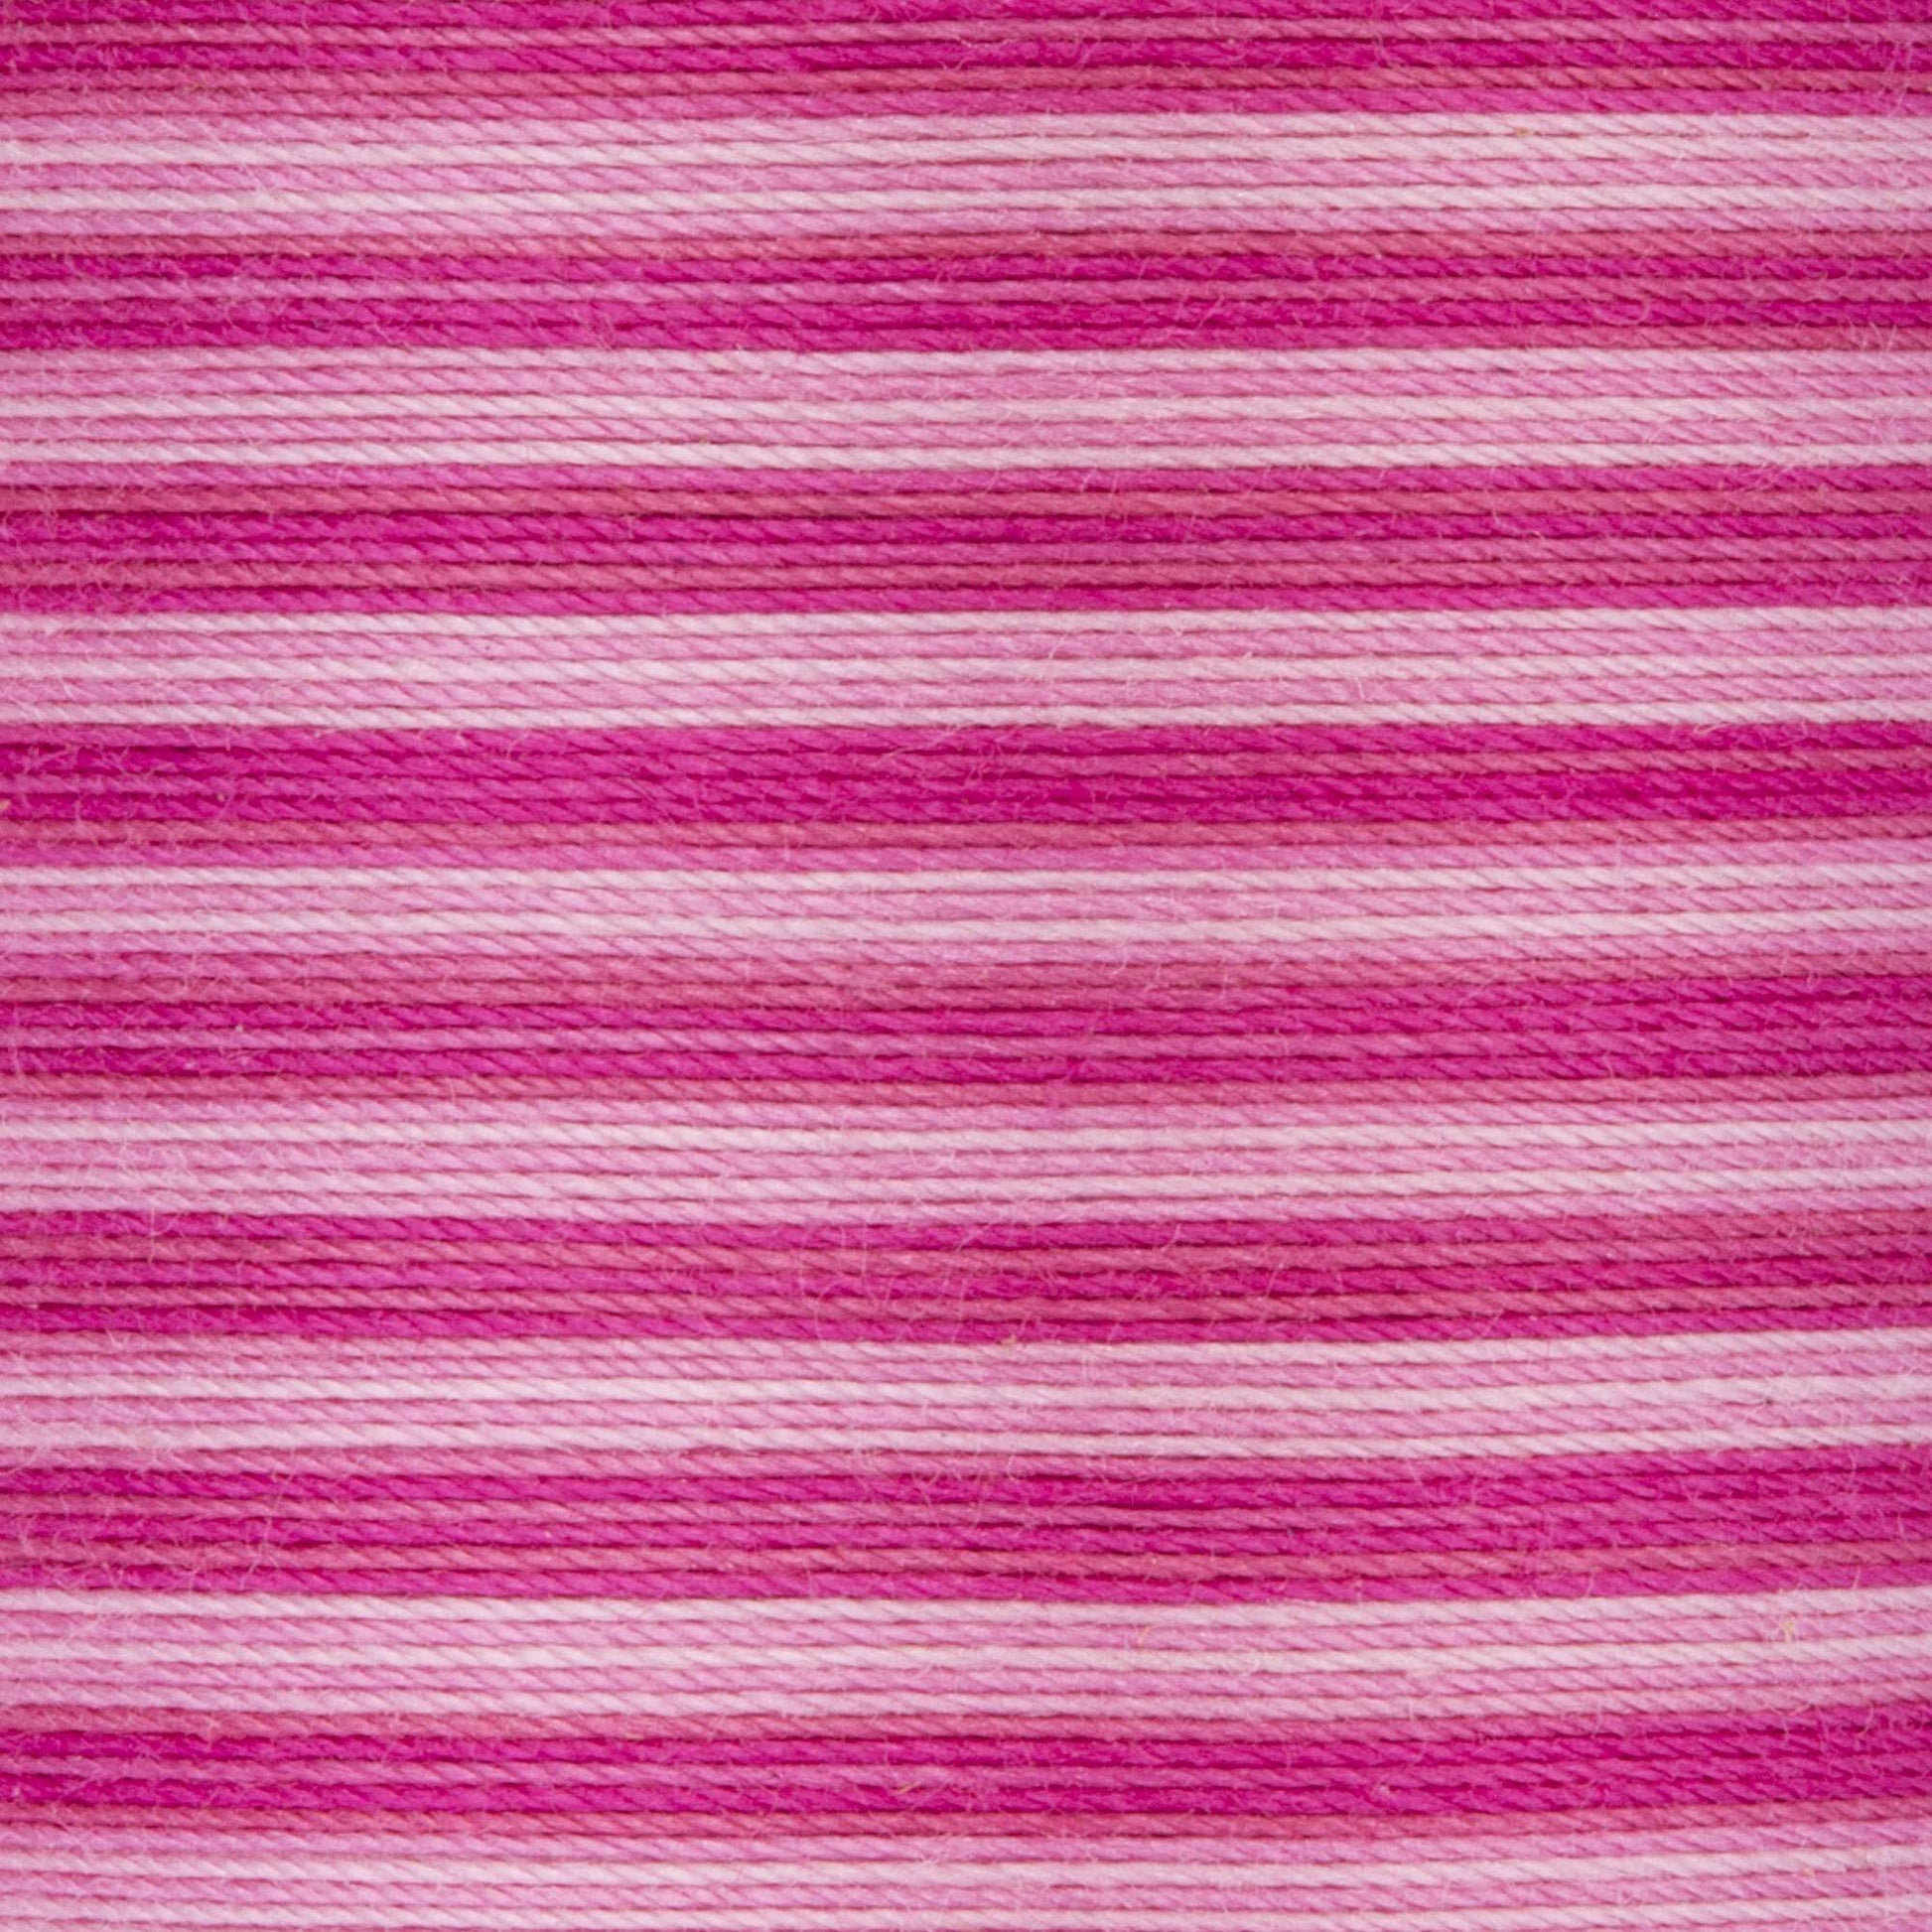 Coats & Clark Cotton Machine Quilting Multicolor Thread (225 Yards) Pink Passion